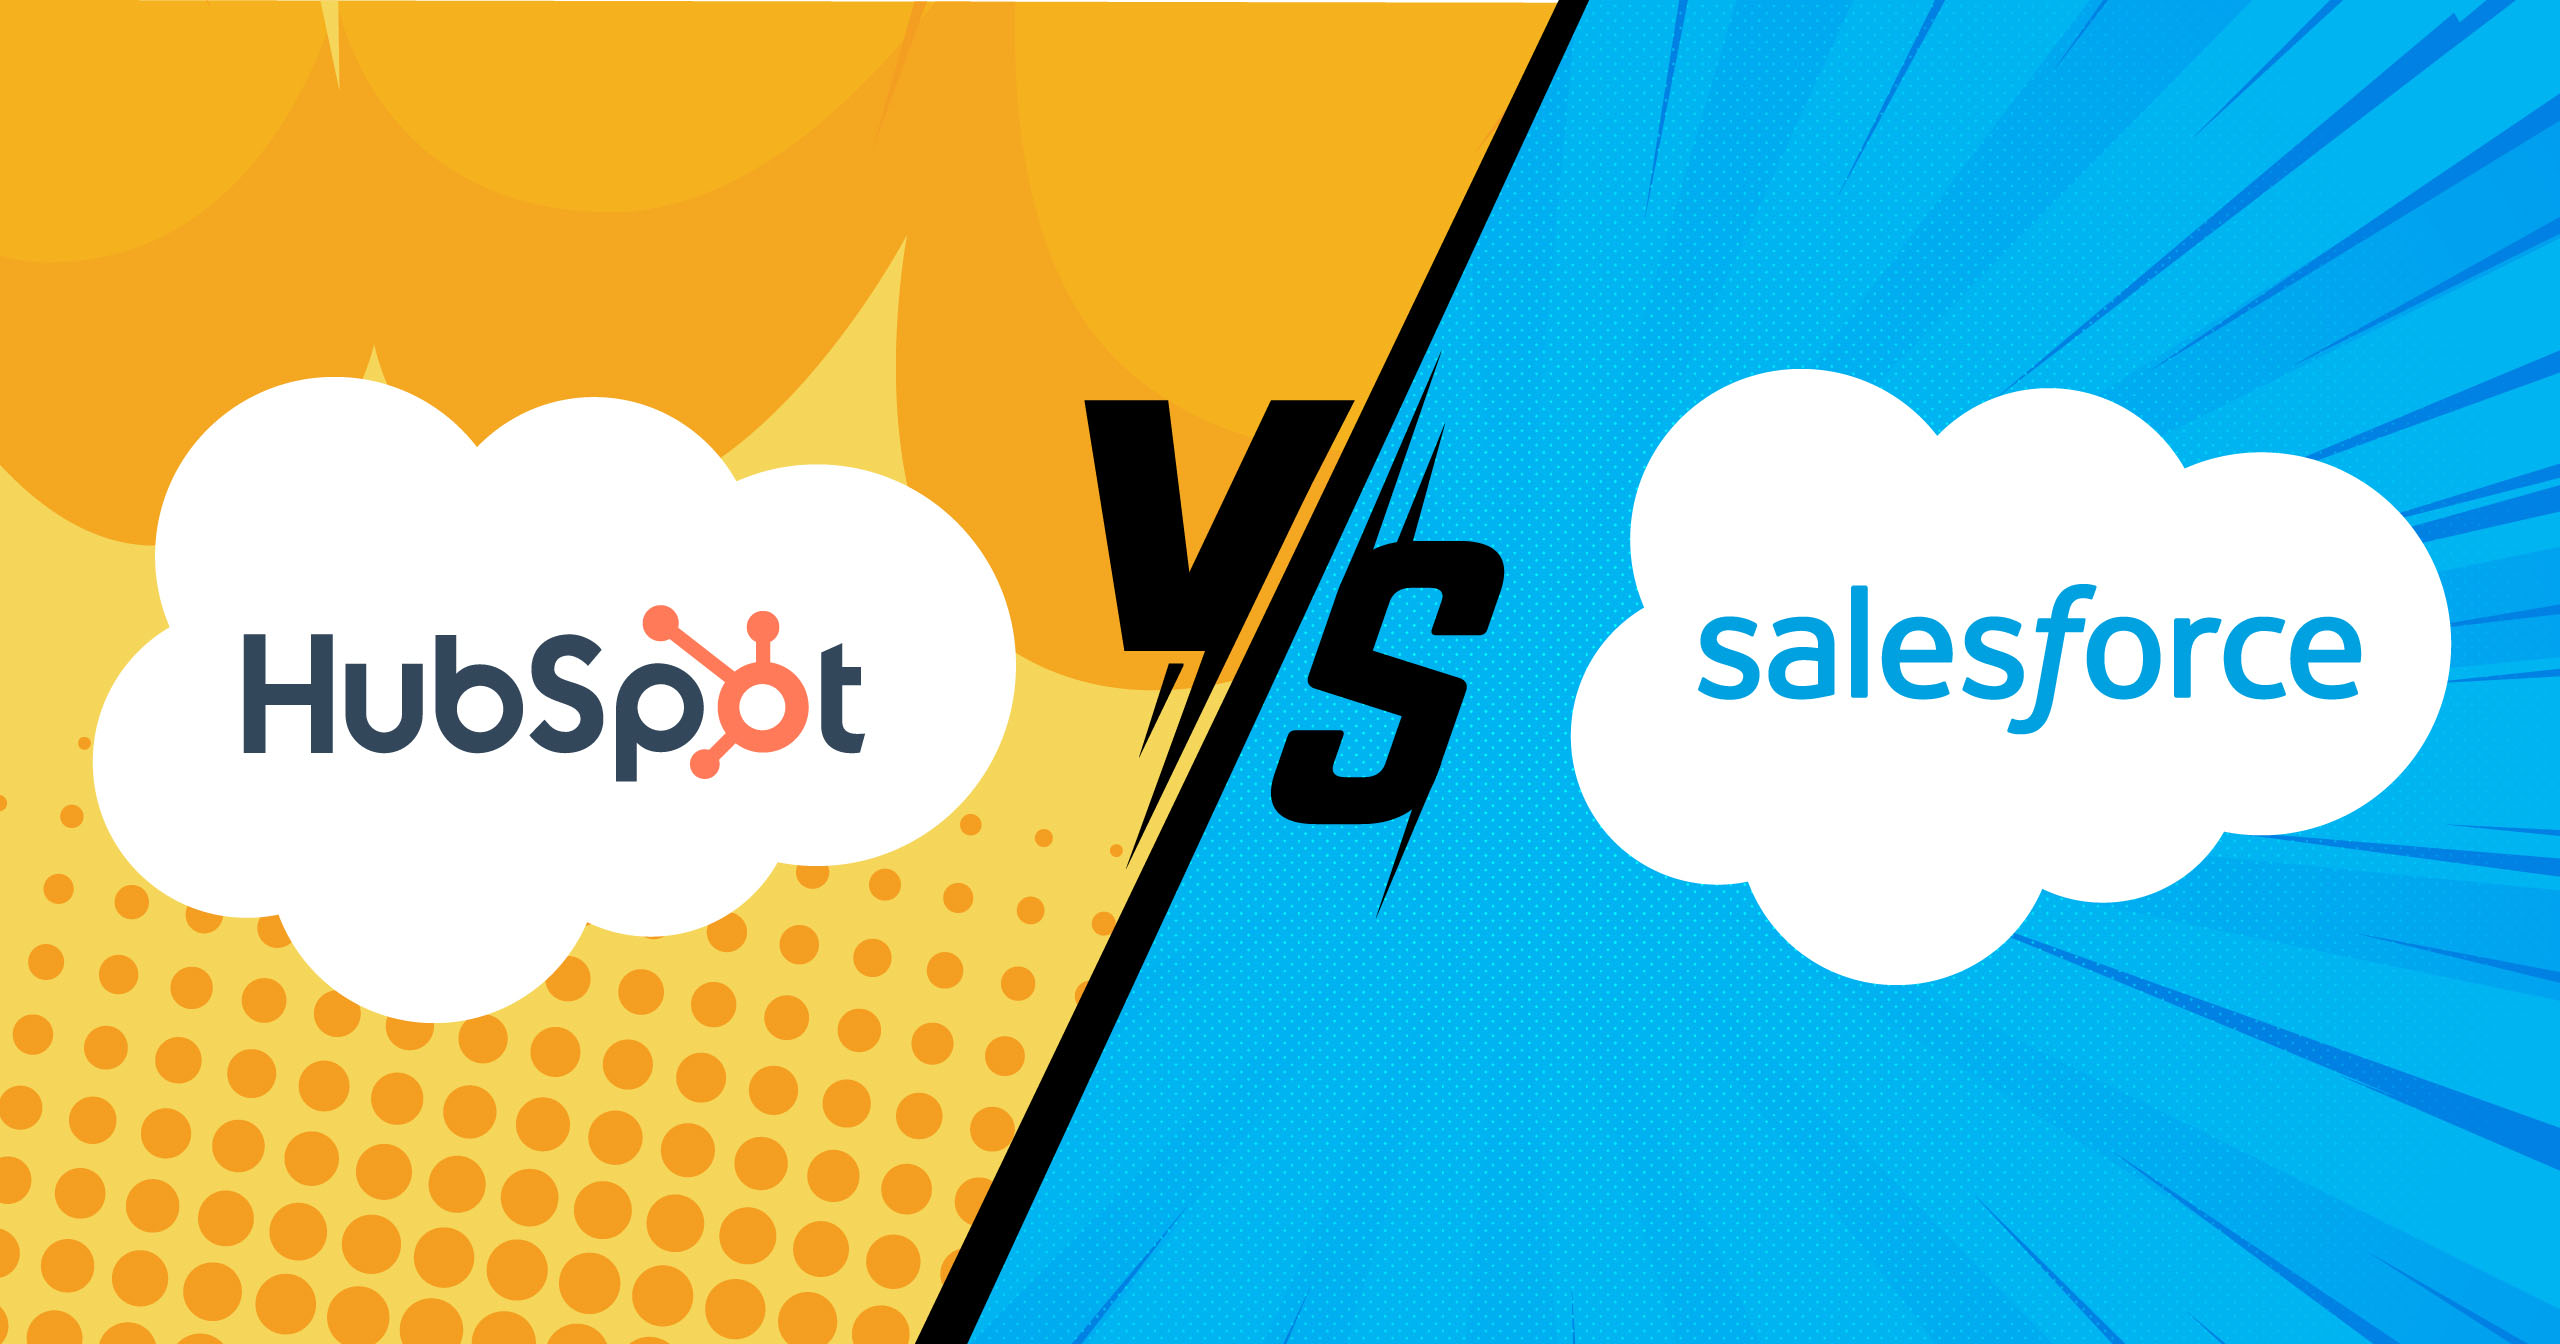 HubSpot Vs. Salesforce: Which One Is The Best For A Startup?